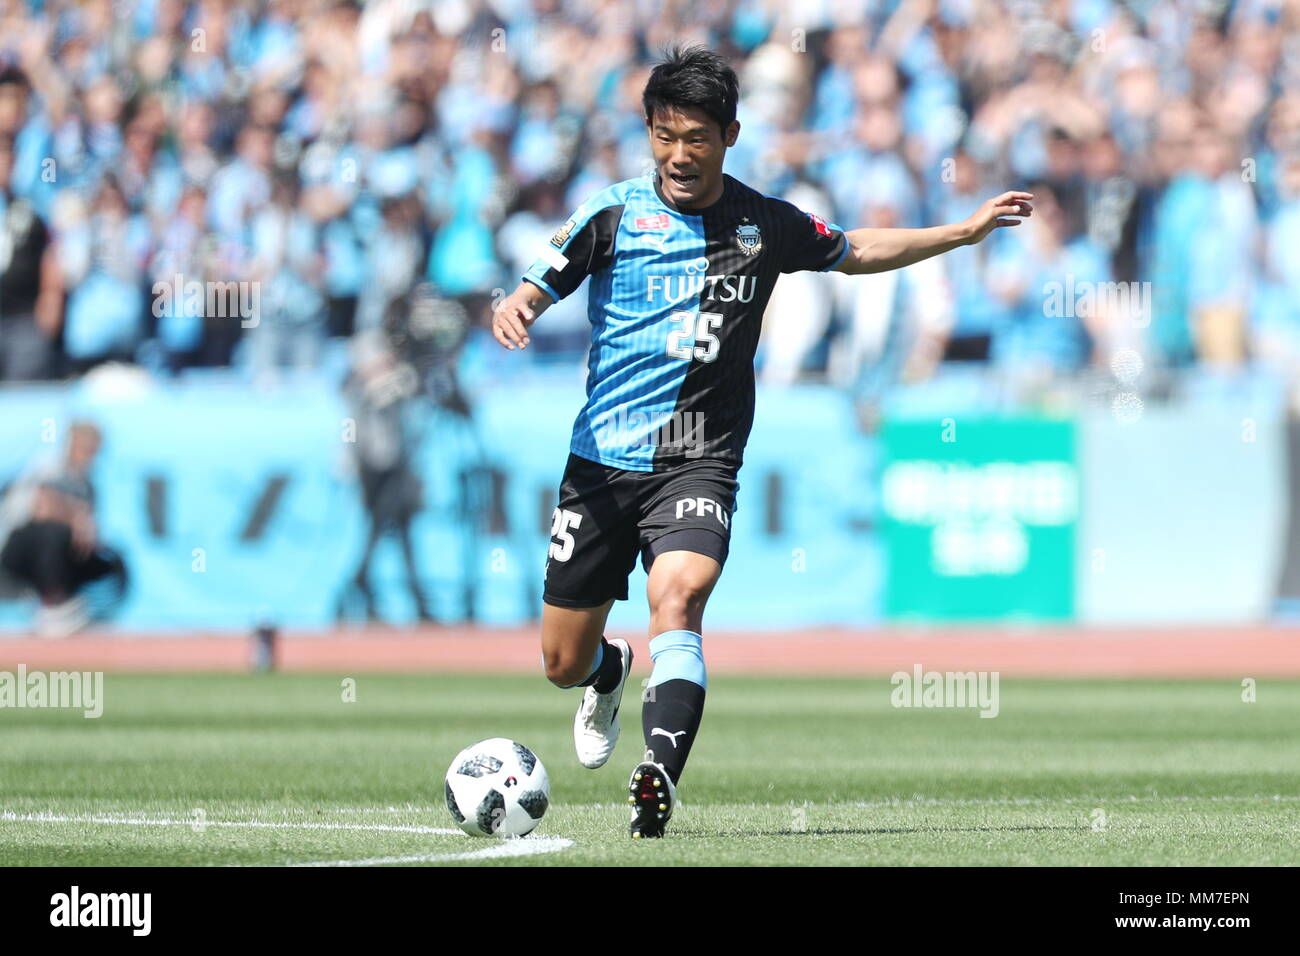 Situation Bekendtgørelse Oceanien Kawasaki Frontale 0 2 F C Tokyo High Resolution Stock Photography and  Images - Alamy